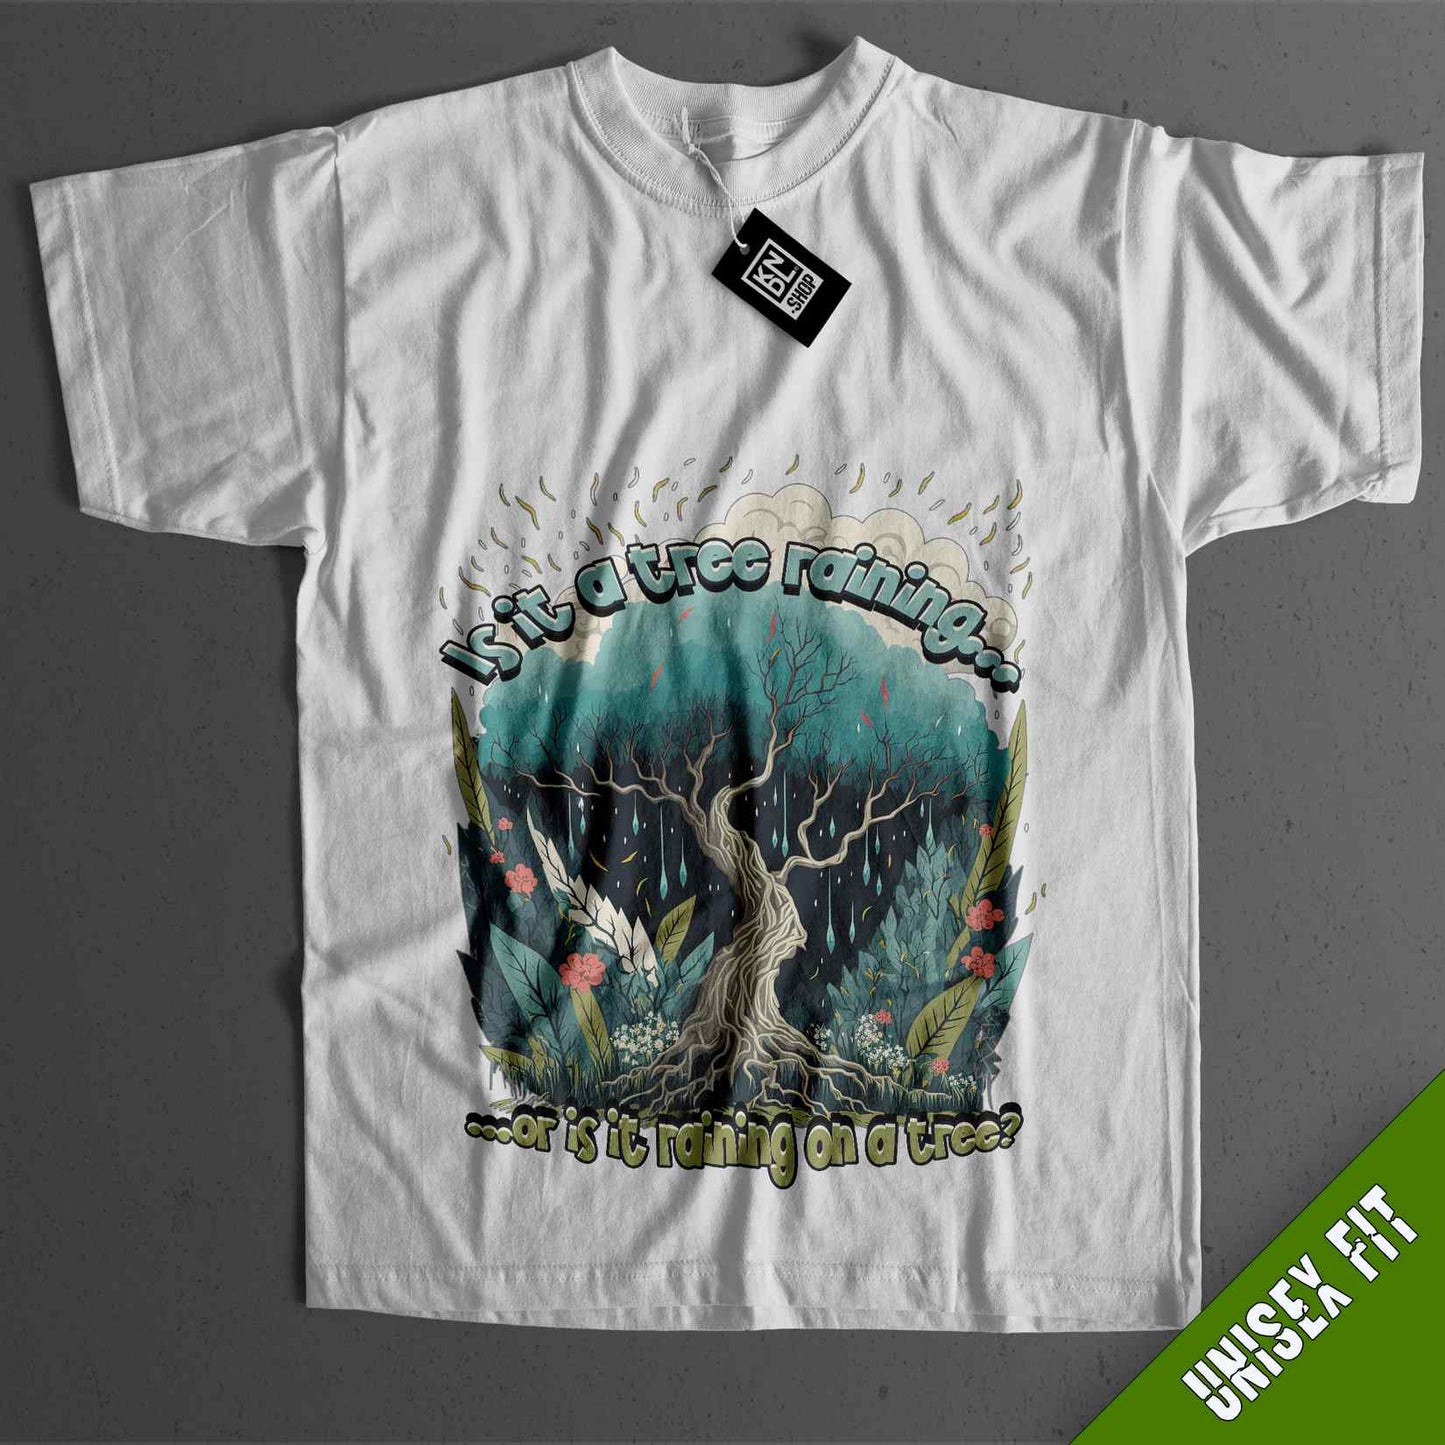 a white t - shirt with a tree and birds on it